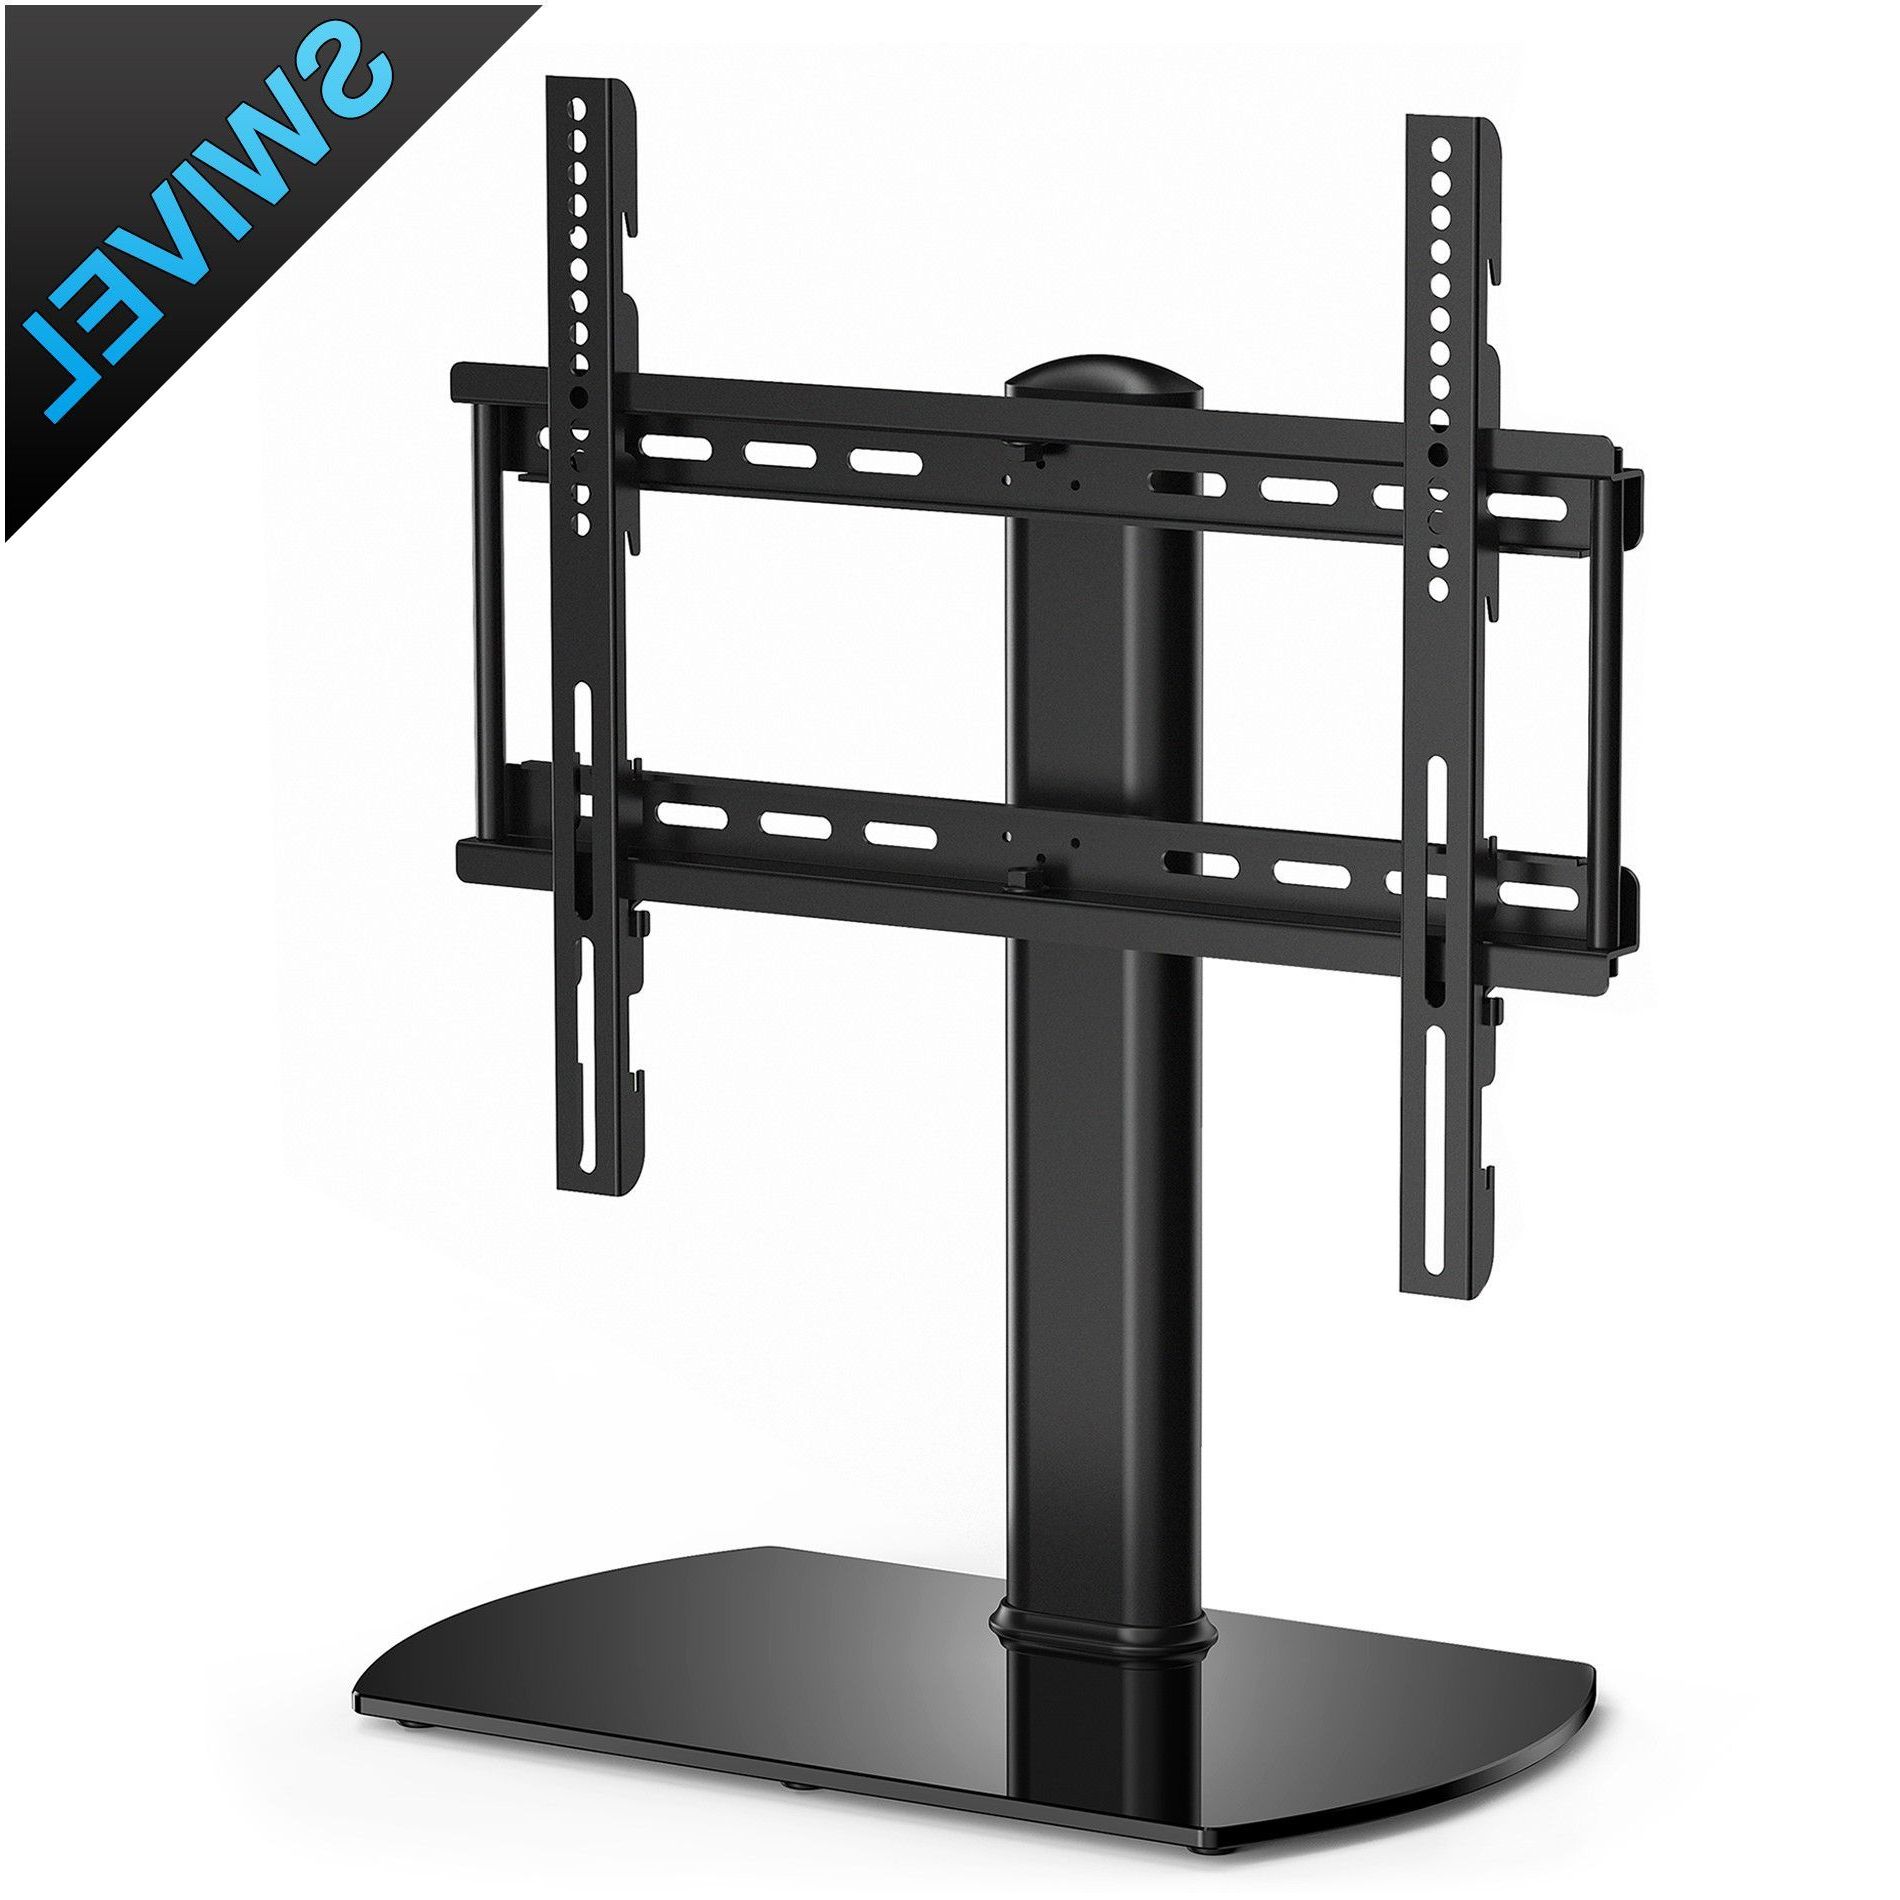 Widely Used Fitueyes Universal Tabletop Tv Stand Pedestal Base Wall In Modern Black Universal Tabletop Tv Stands (View 5 of 10)